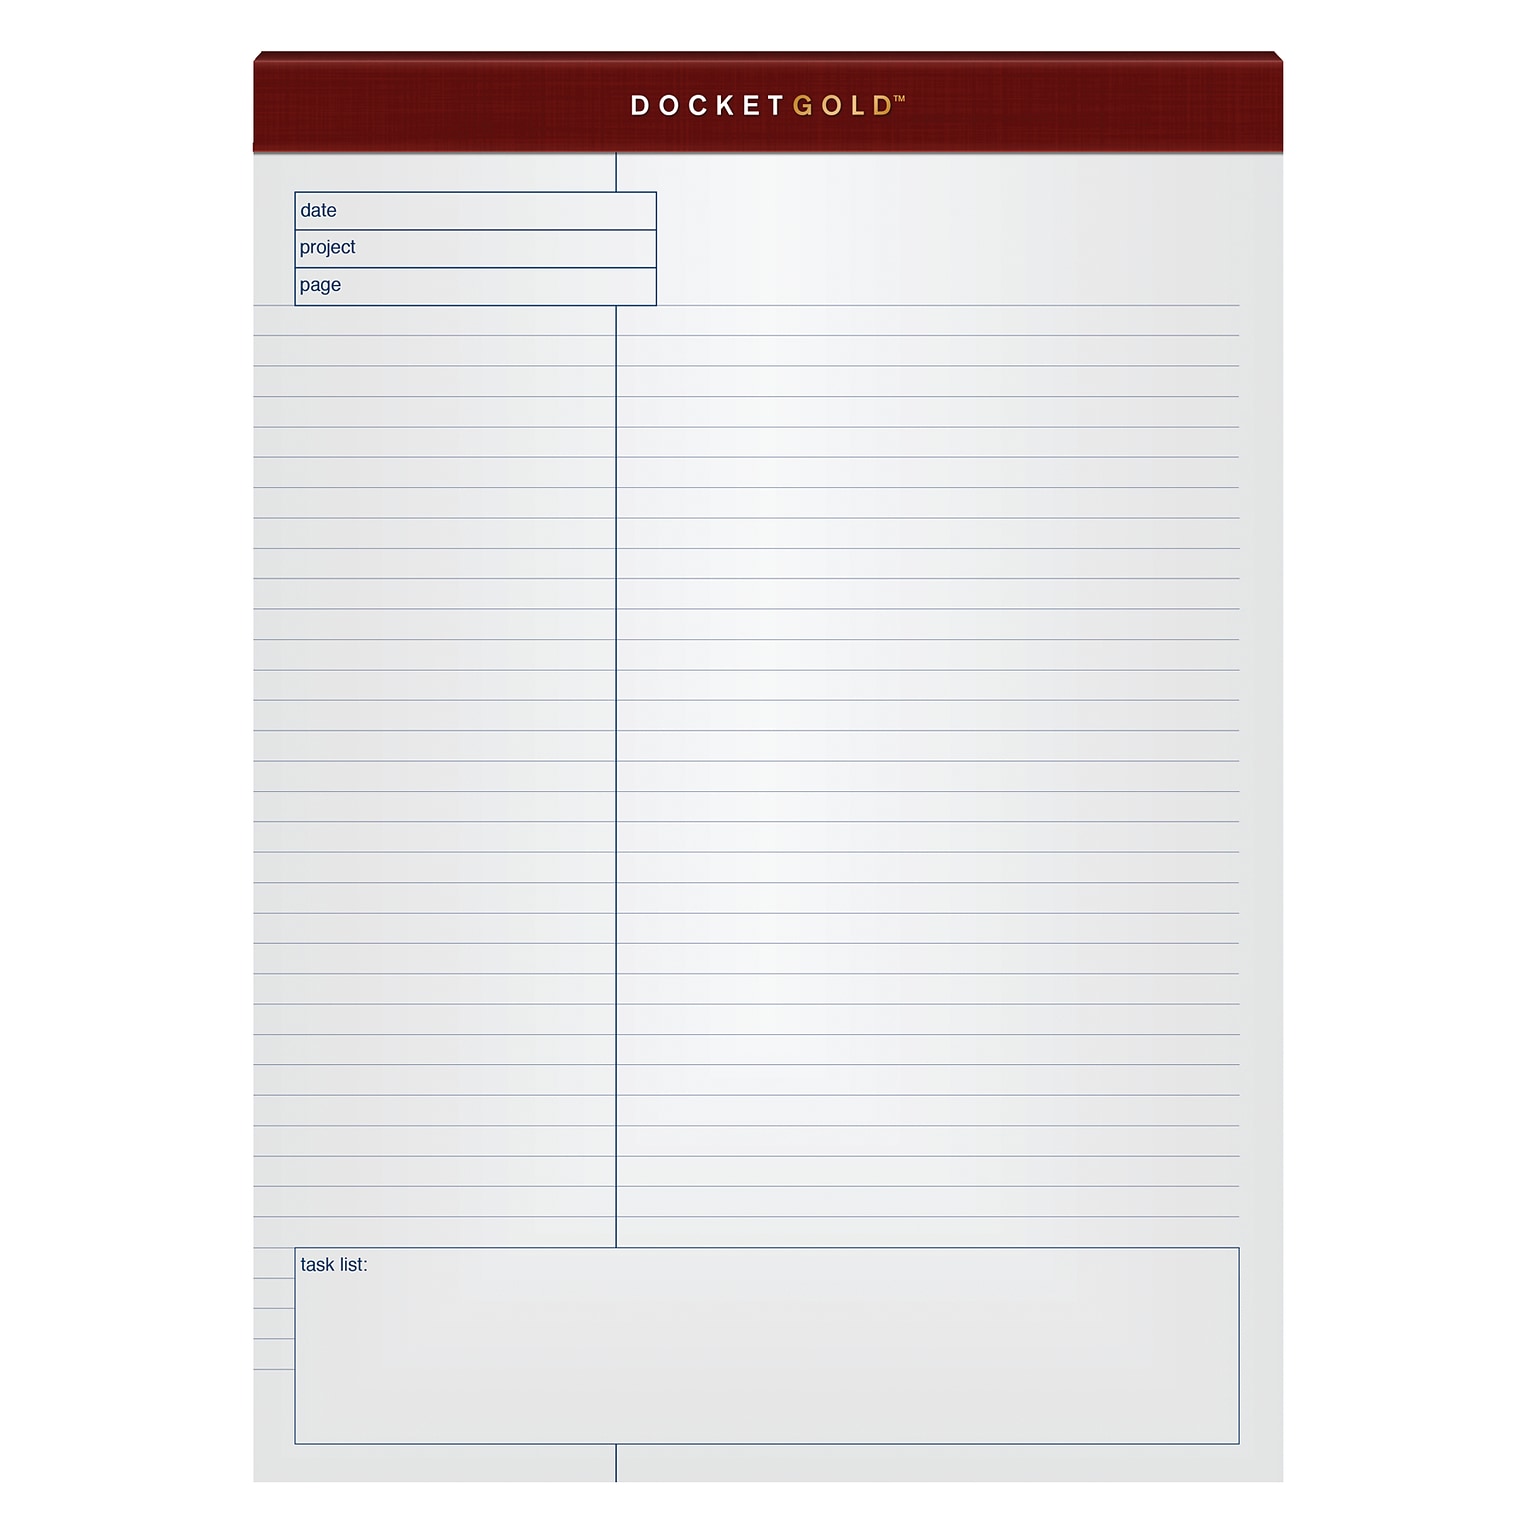 TOPS Docket Gold Notepads, 8.5 x 11.75, Quad, White, 40 Sheets/Pad, 4 Pads/Pack (TOP 77102)